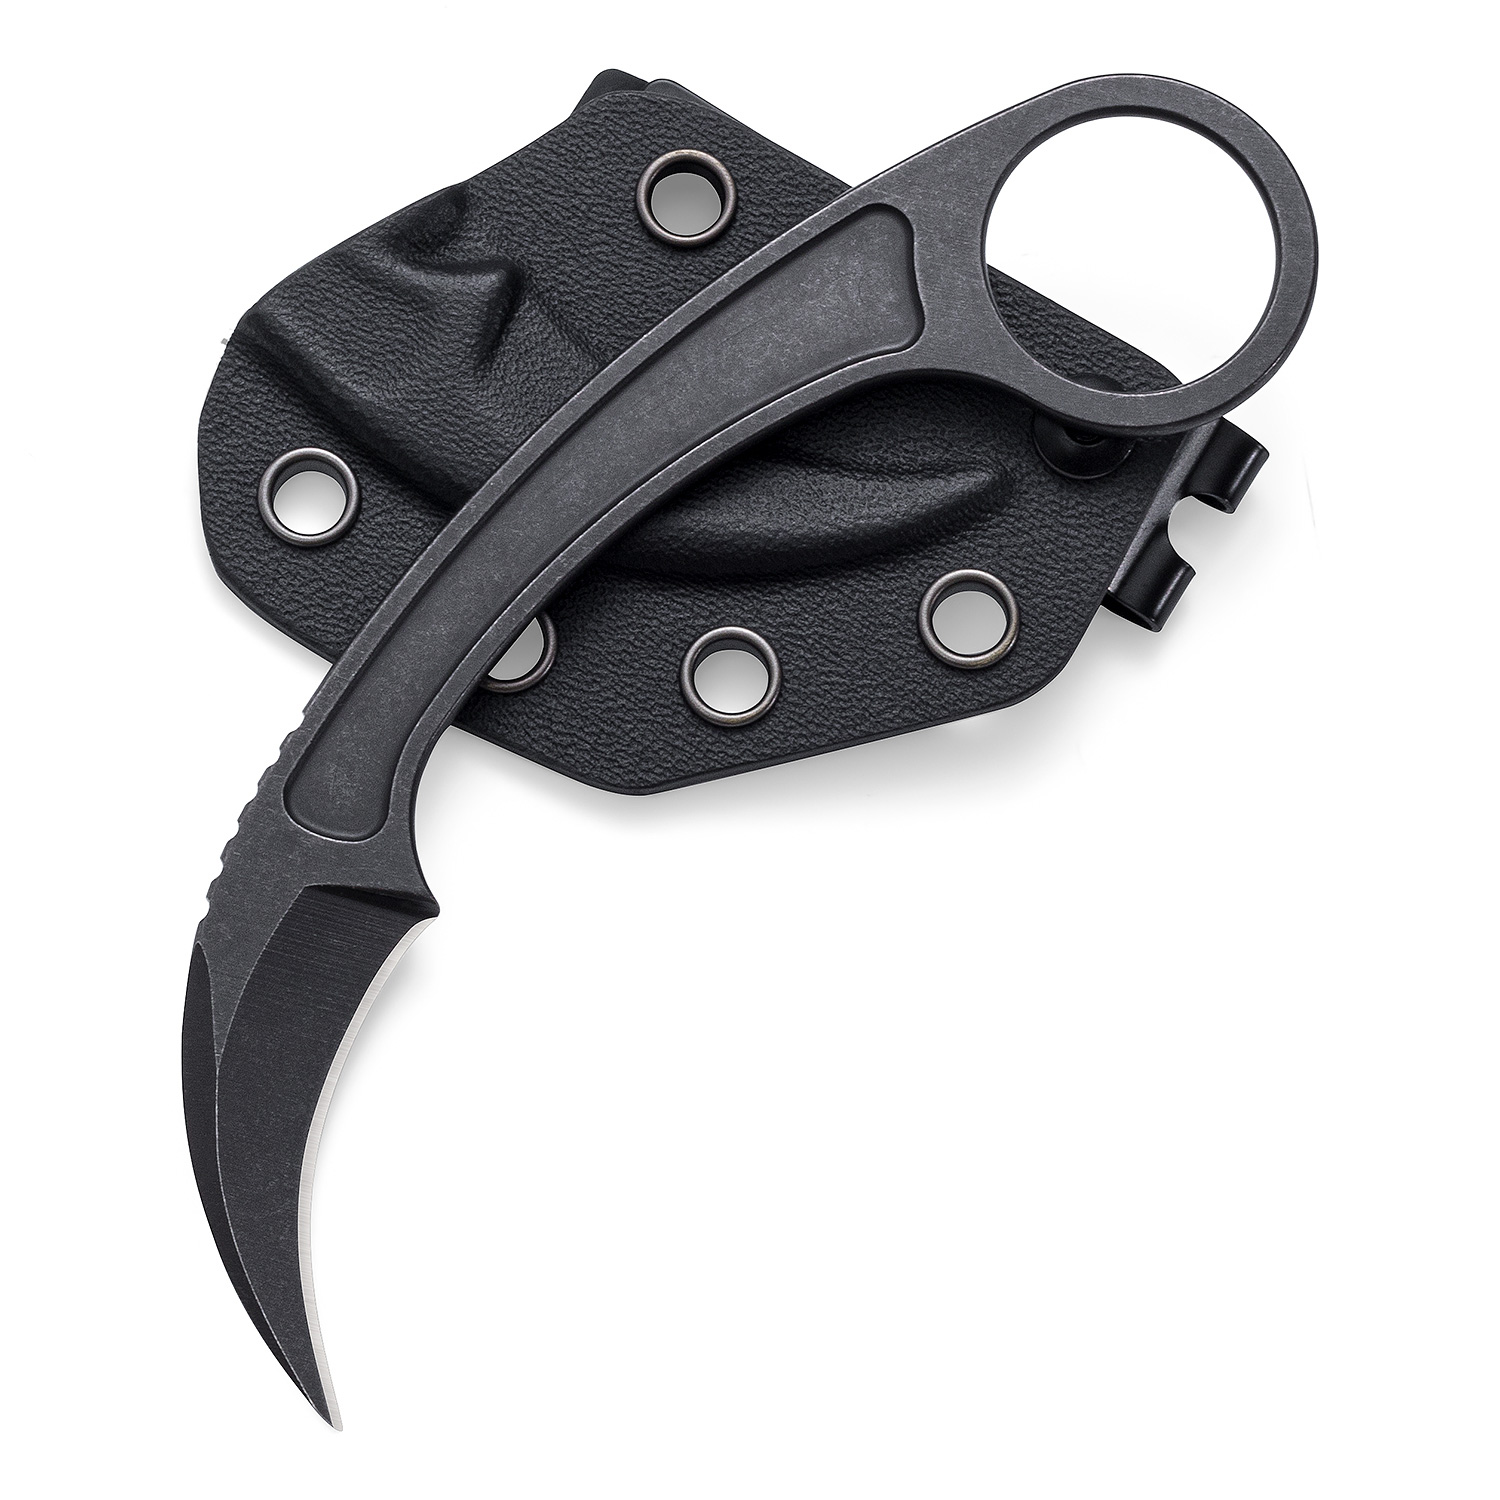 OOULORE Fixed Karambit Sharp Claw Knife Stainless Steel Handle (1.57″ Black  Stonewshed 440C Blade) OK109 – OOULORE